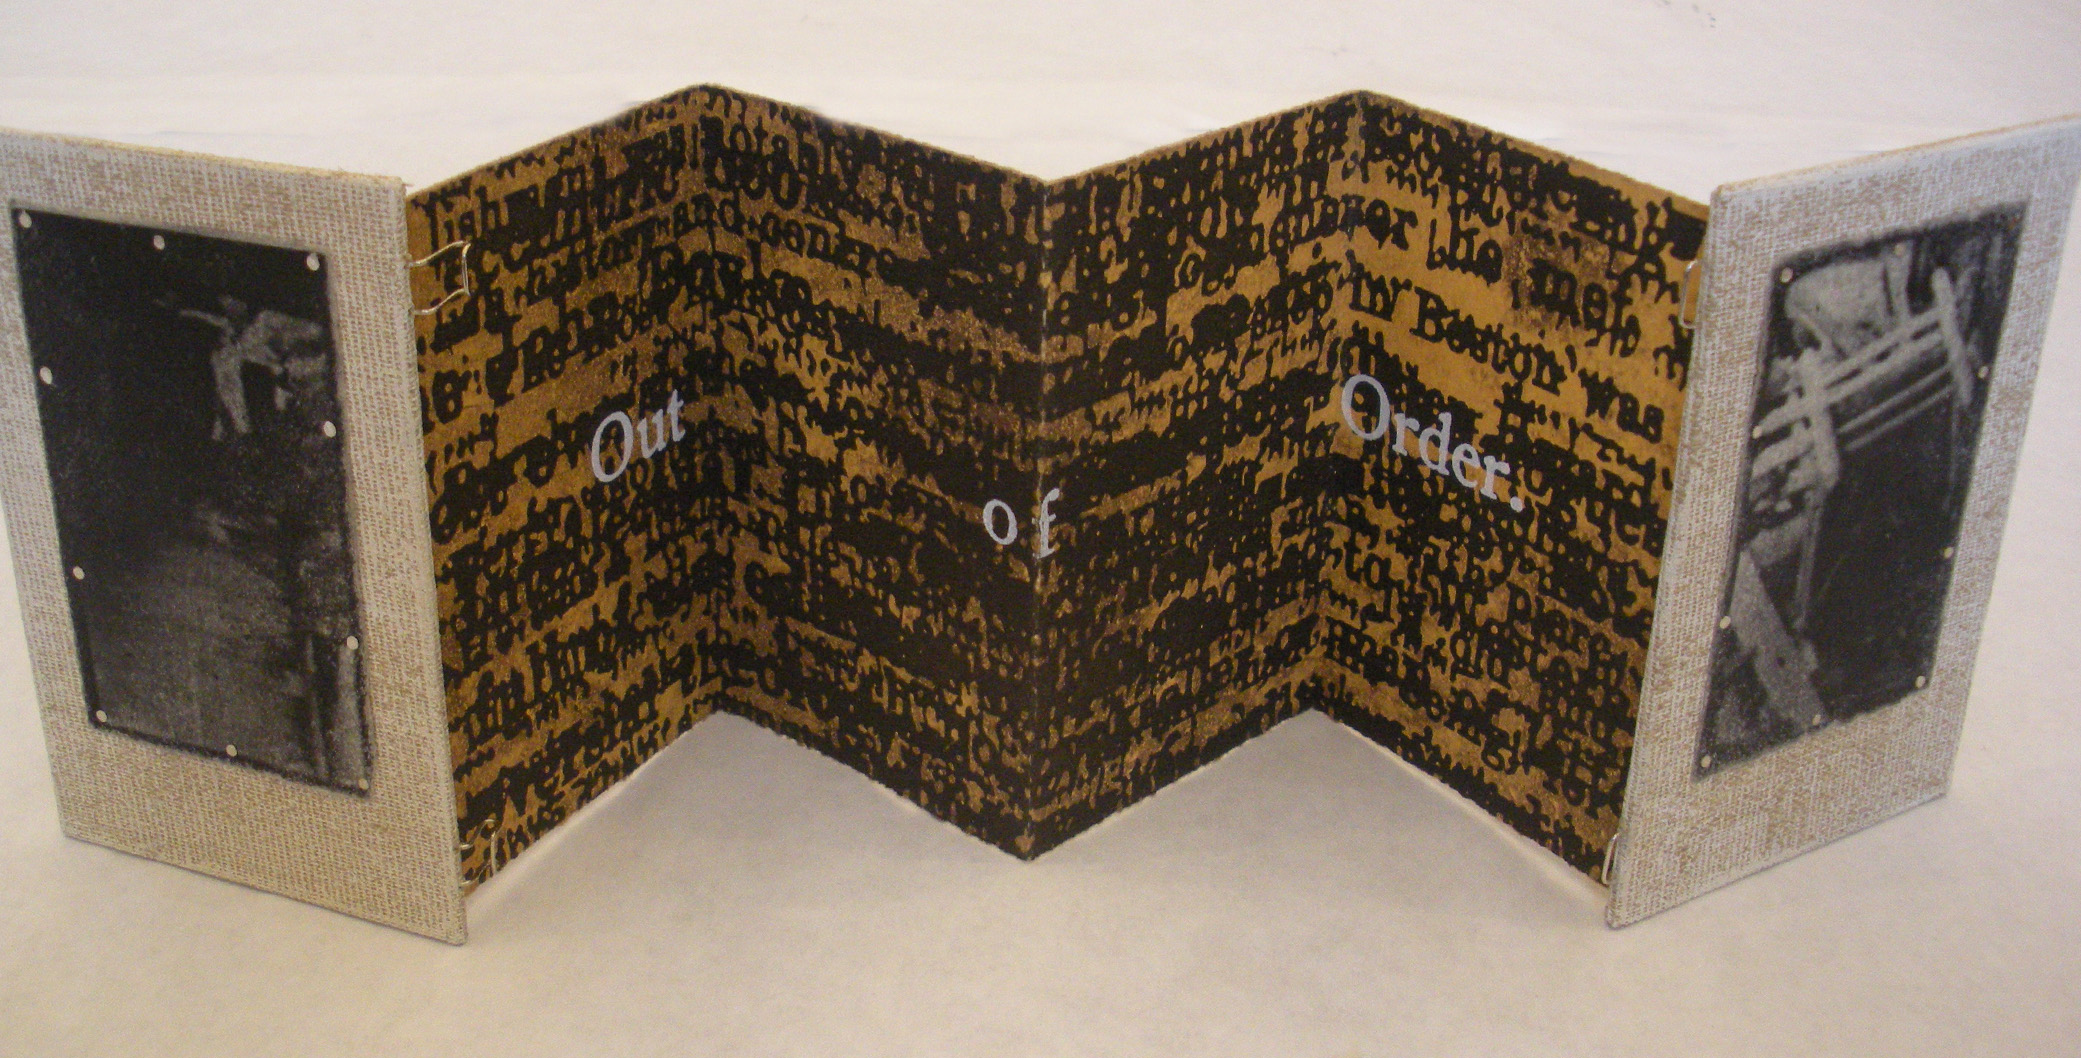 Book work created by Scott Cook, a Master of Fine Arts student in the UNL Department of Art and Art History.